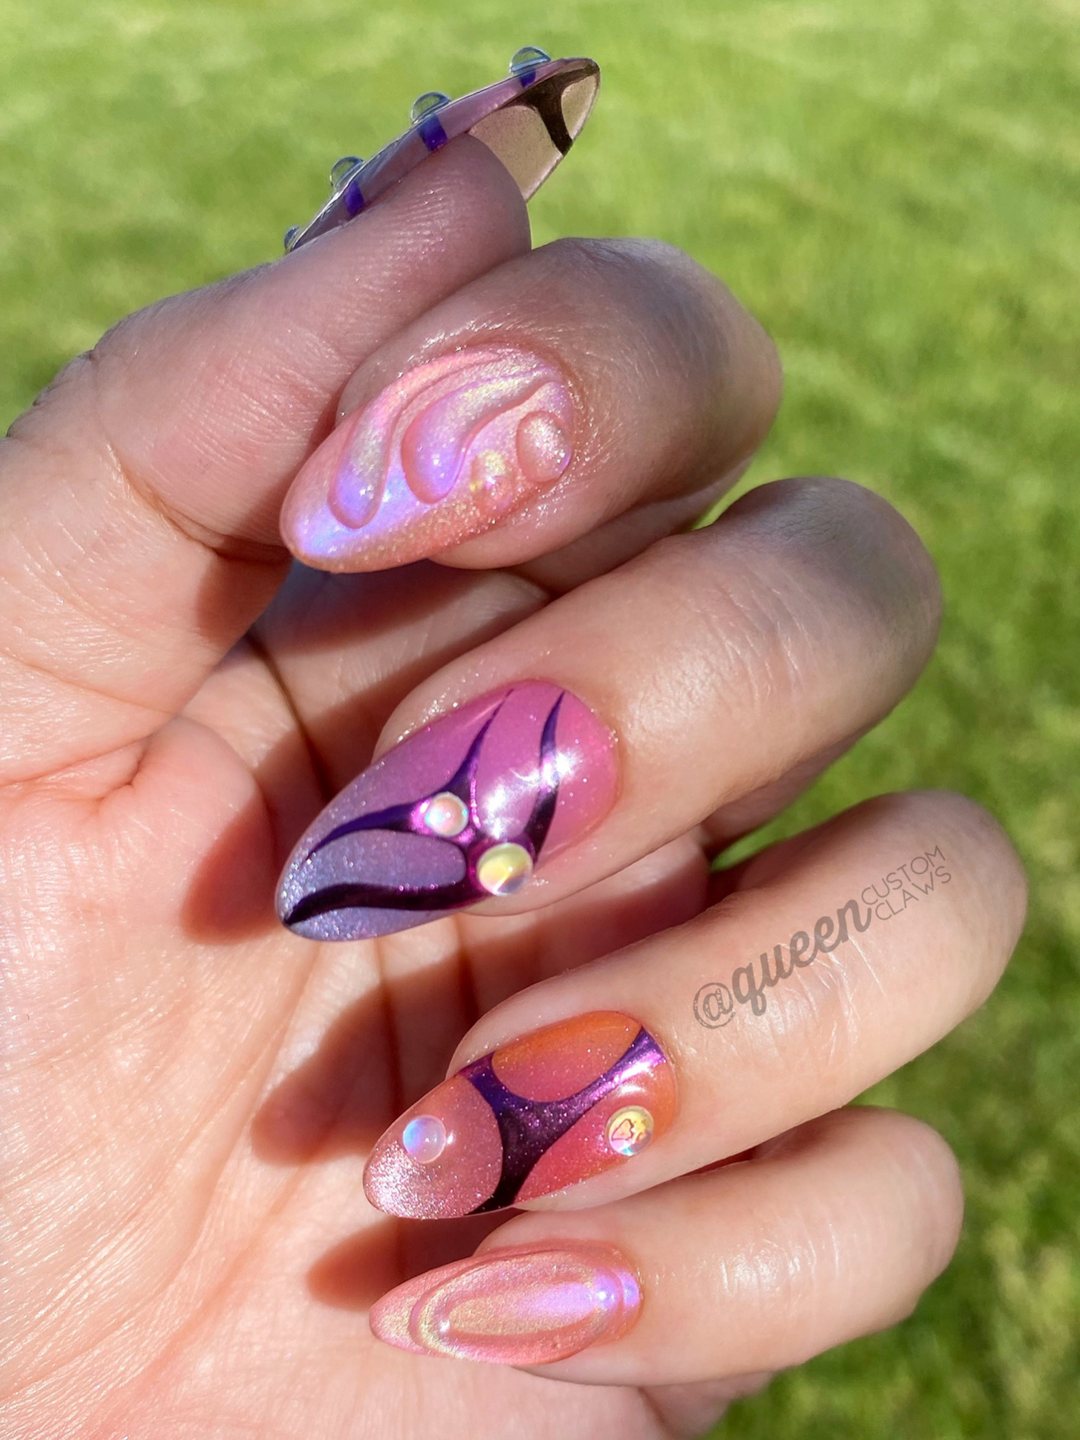 almond shaped press on nails, custom designed with chrome & ombre, with chrome tribal swirls, 3d gem dots & jelly swoop accents. shown in natural light, modeled on the hand